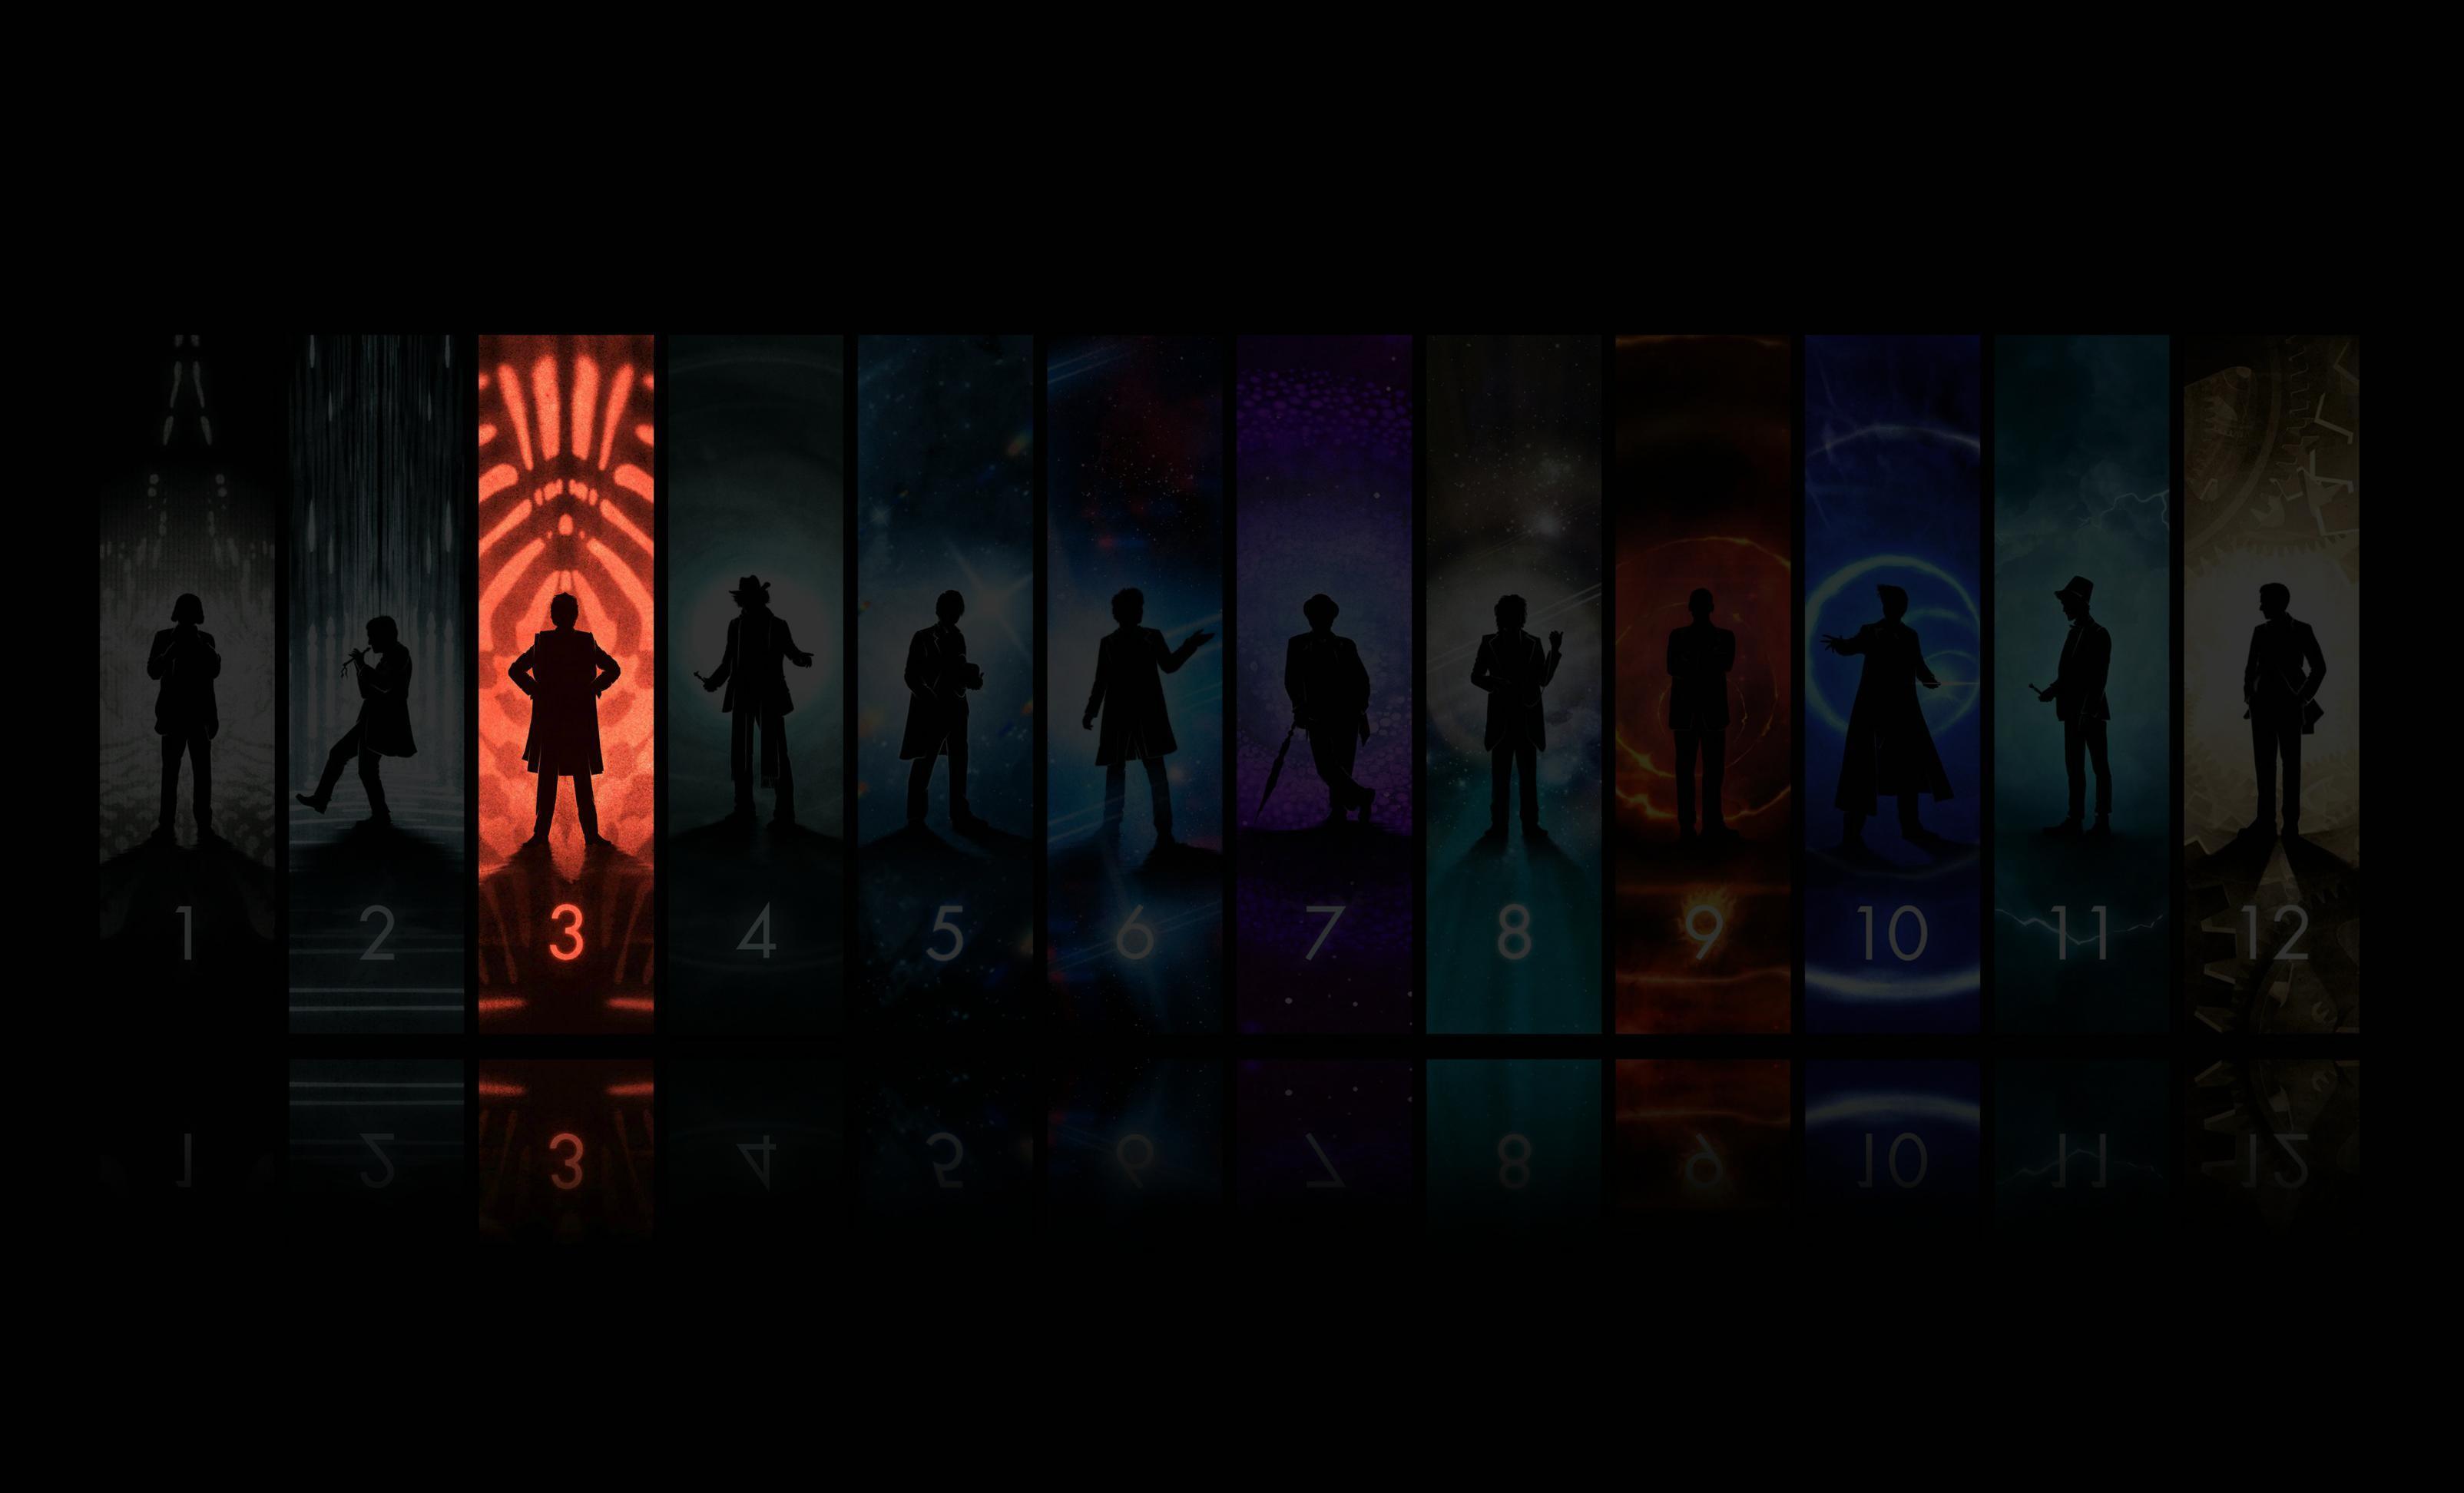 Here's how you enjoy an awesome Doctor Who wallpaper